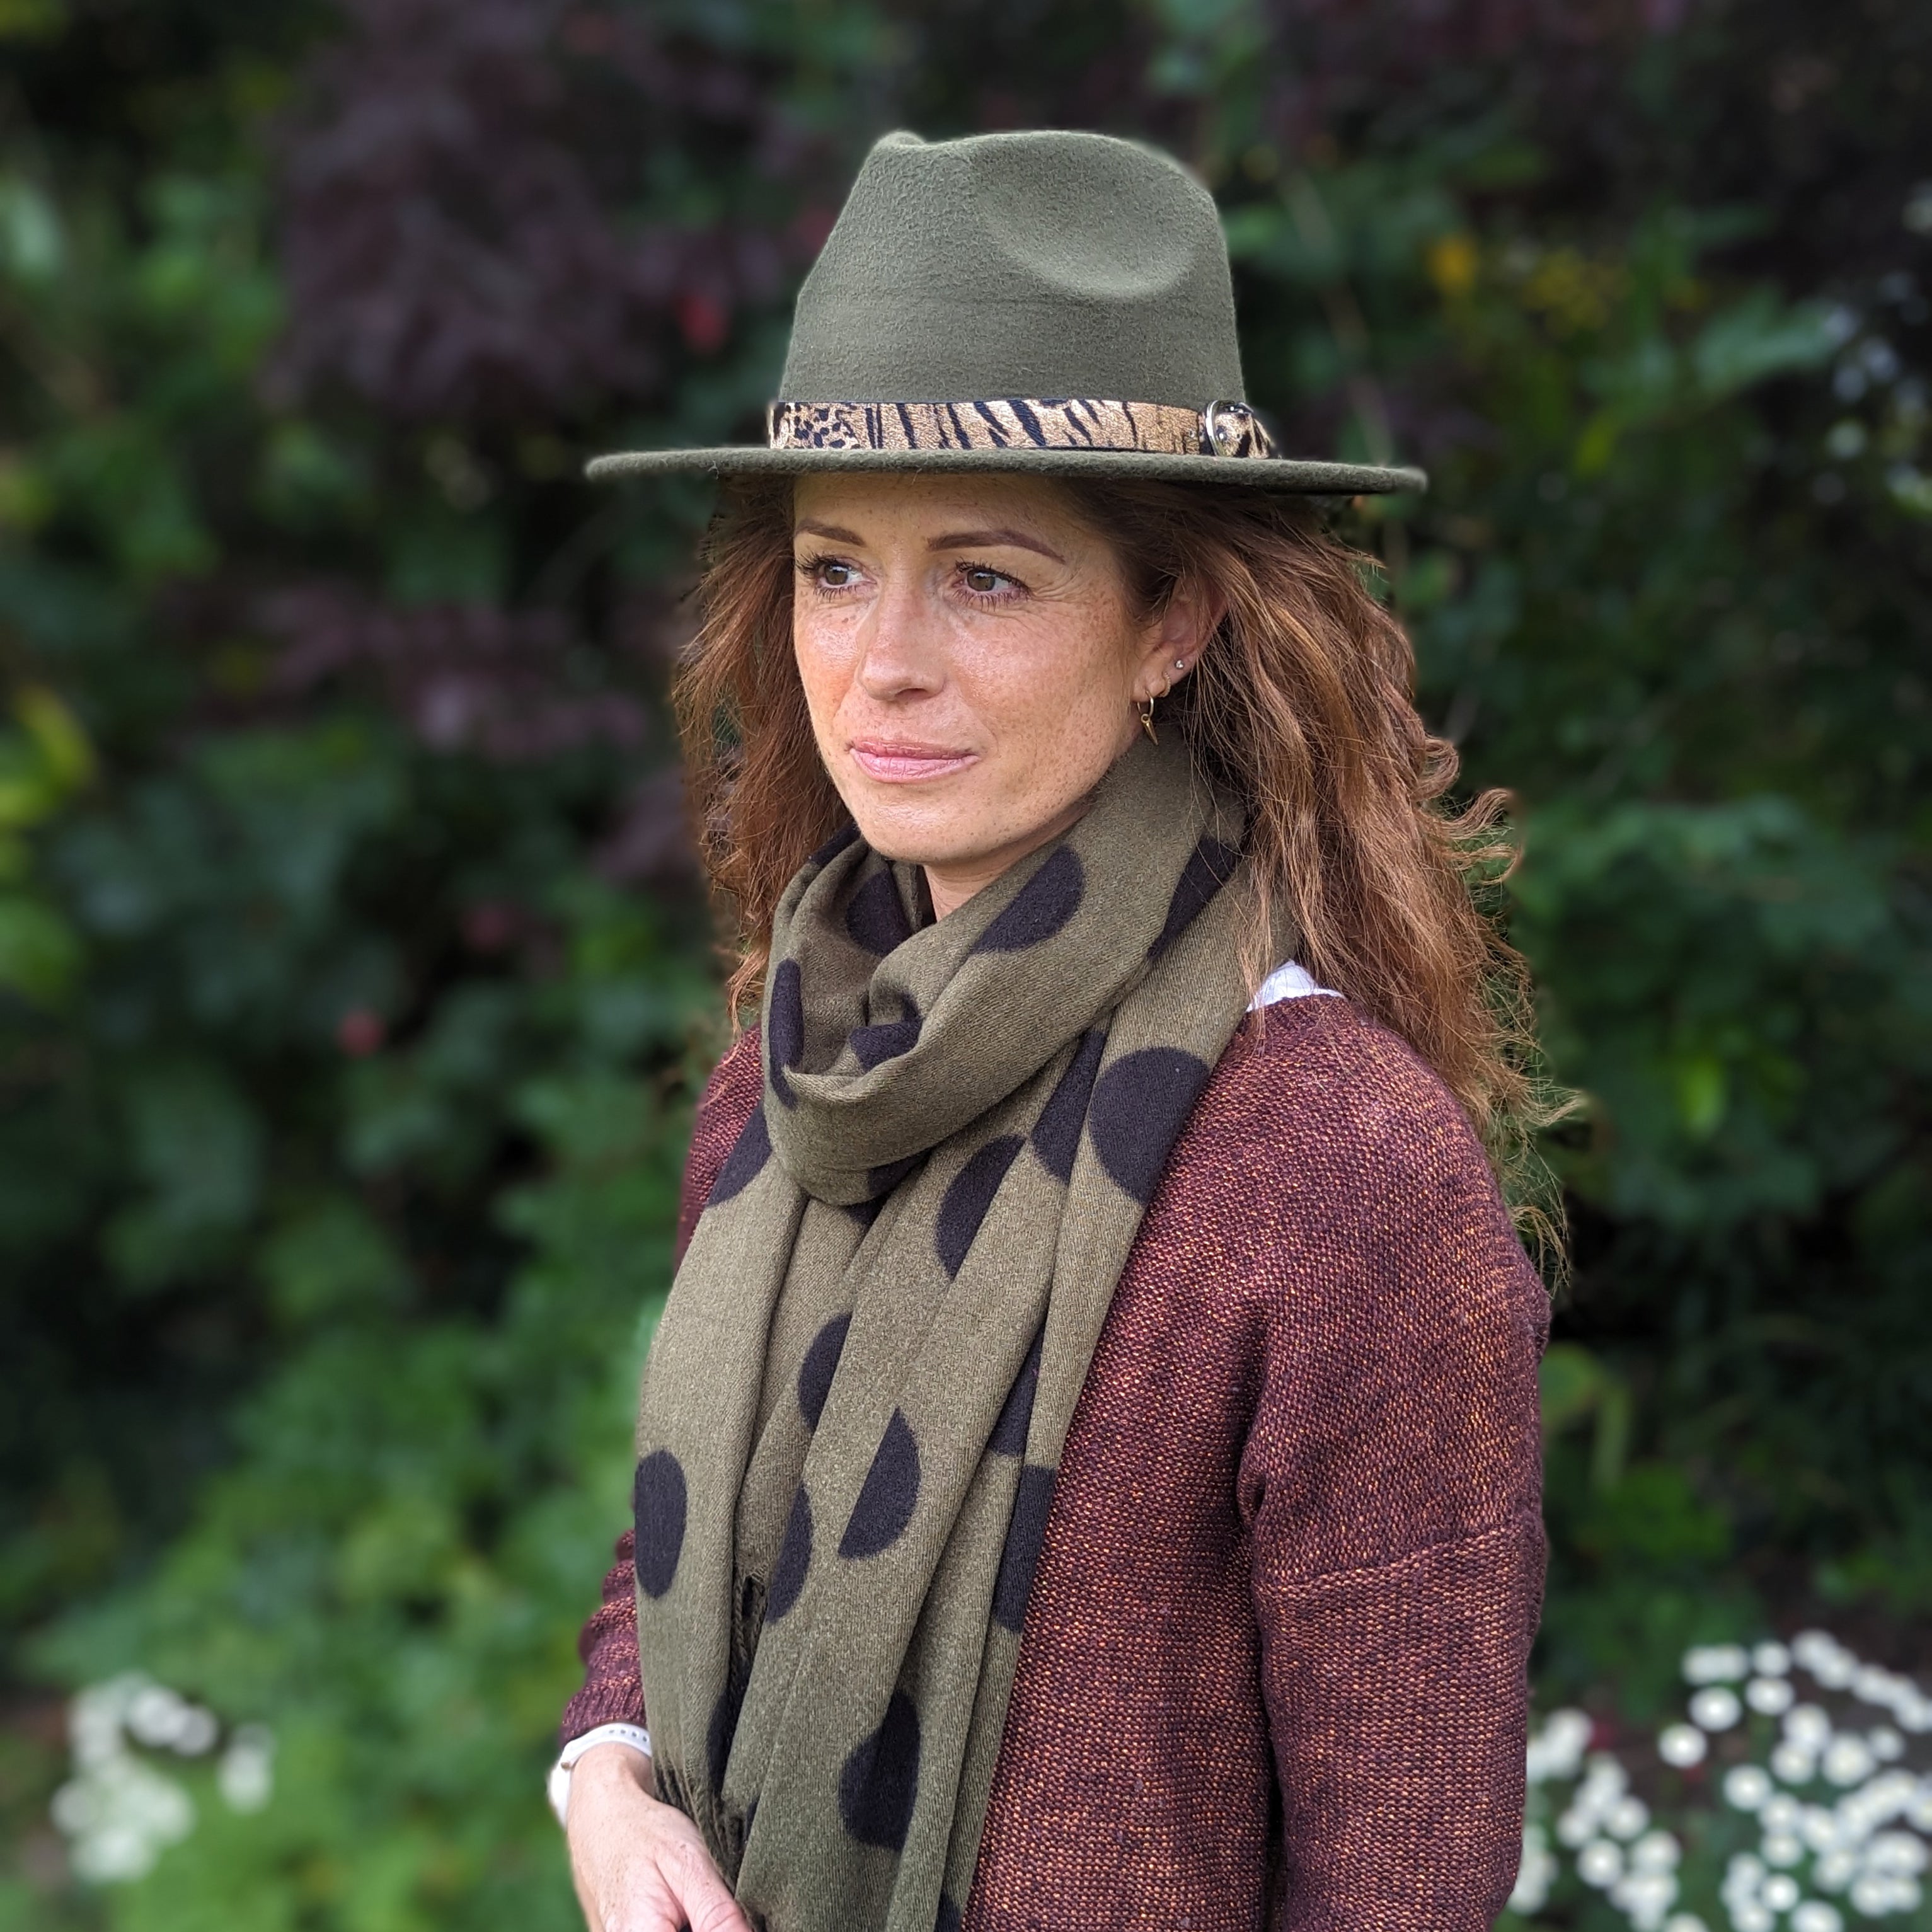 Forest Green Fedora Hat - Animal Print Band